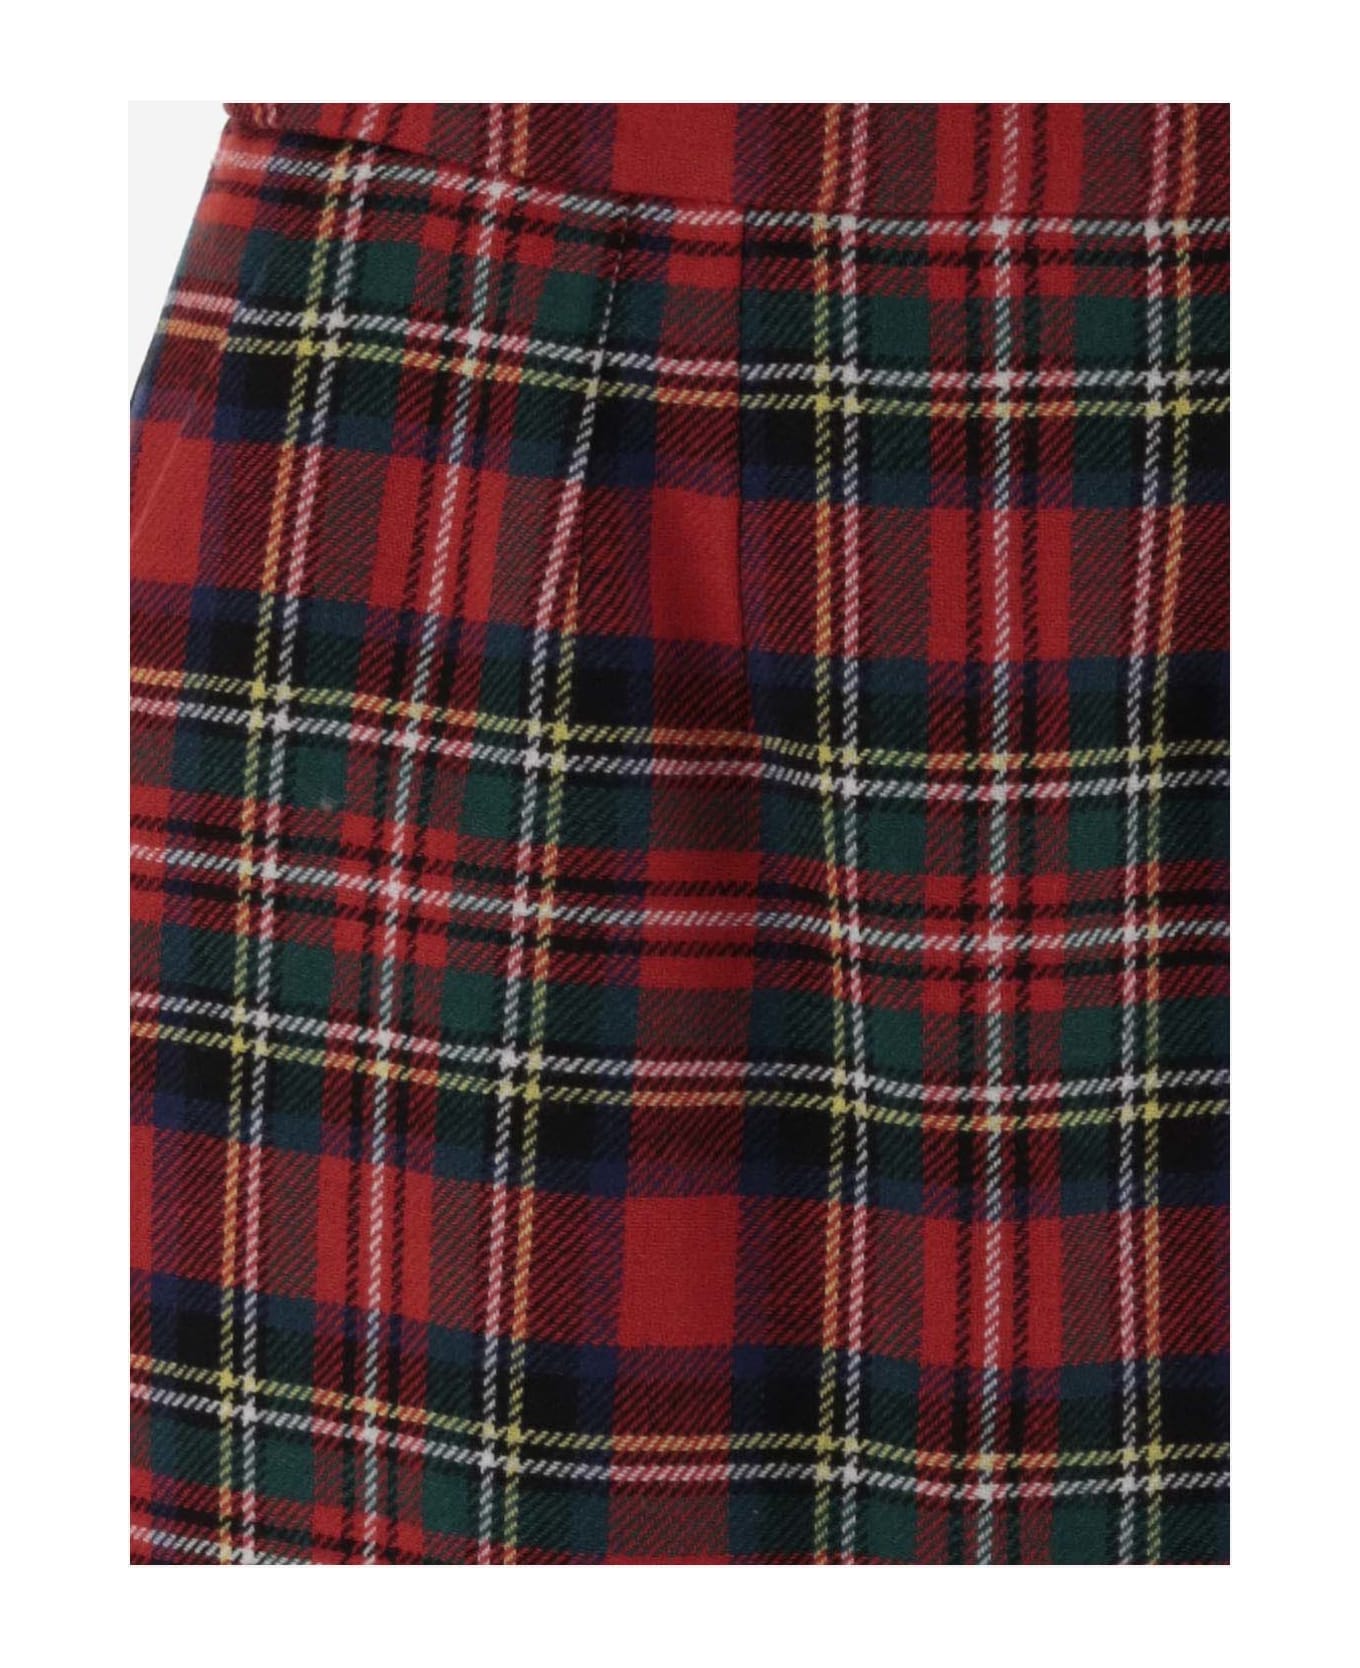 Saint Laurent Wool Blend Skirt With Check Pattern - ROUGE MULTICO スカート